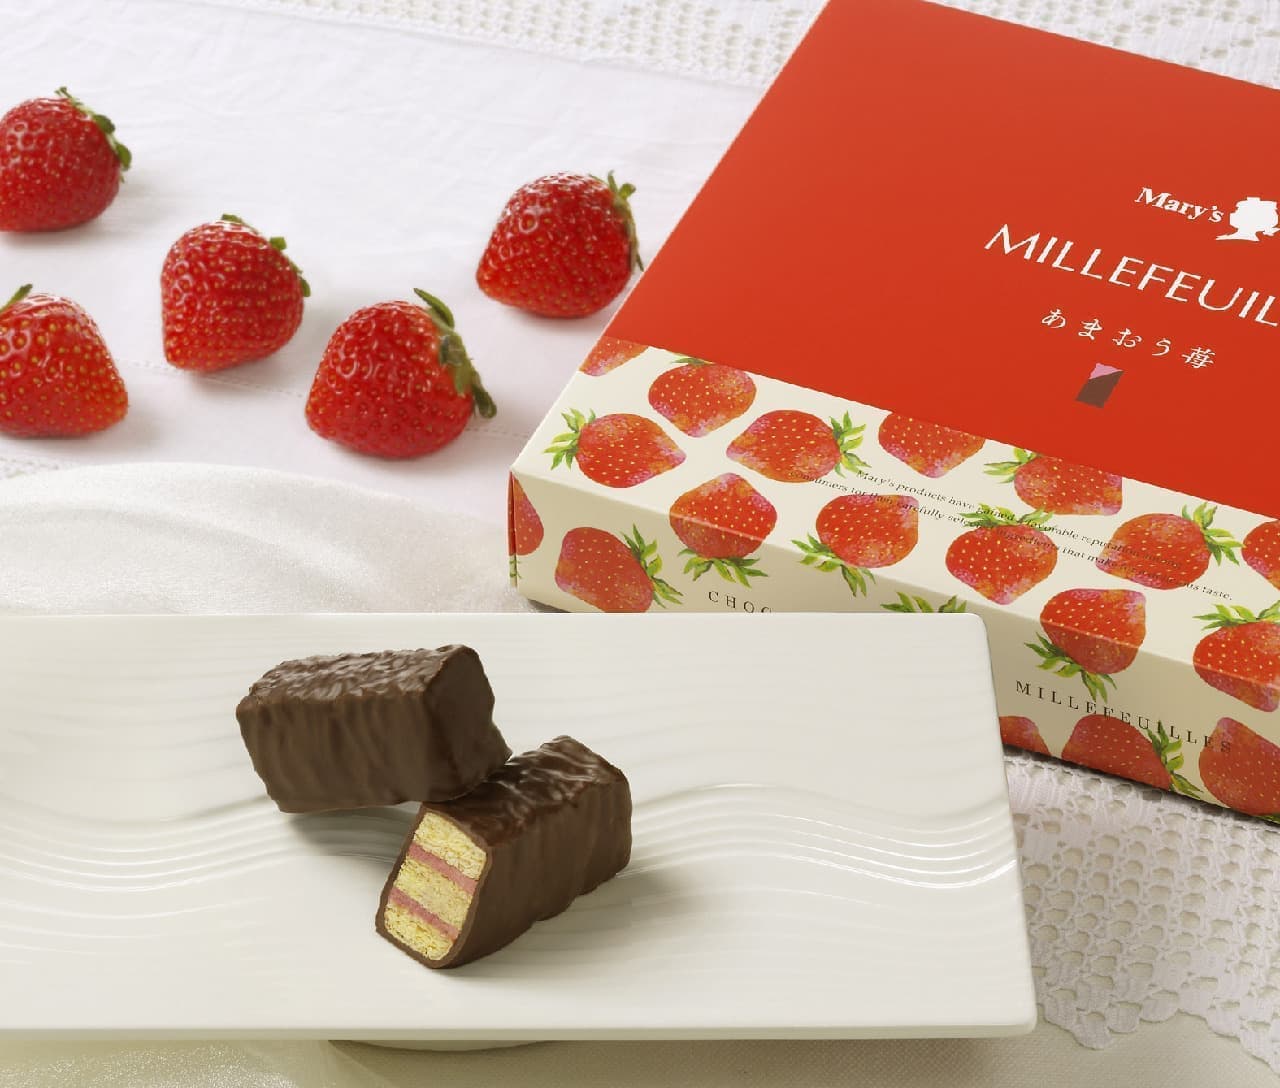 Mary chocolate "Mille-feuille (Amaou strawberry)"